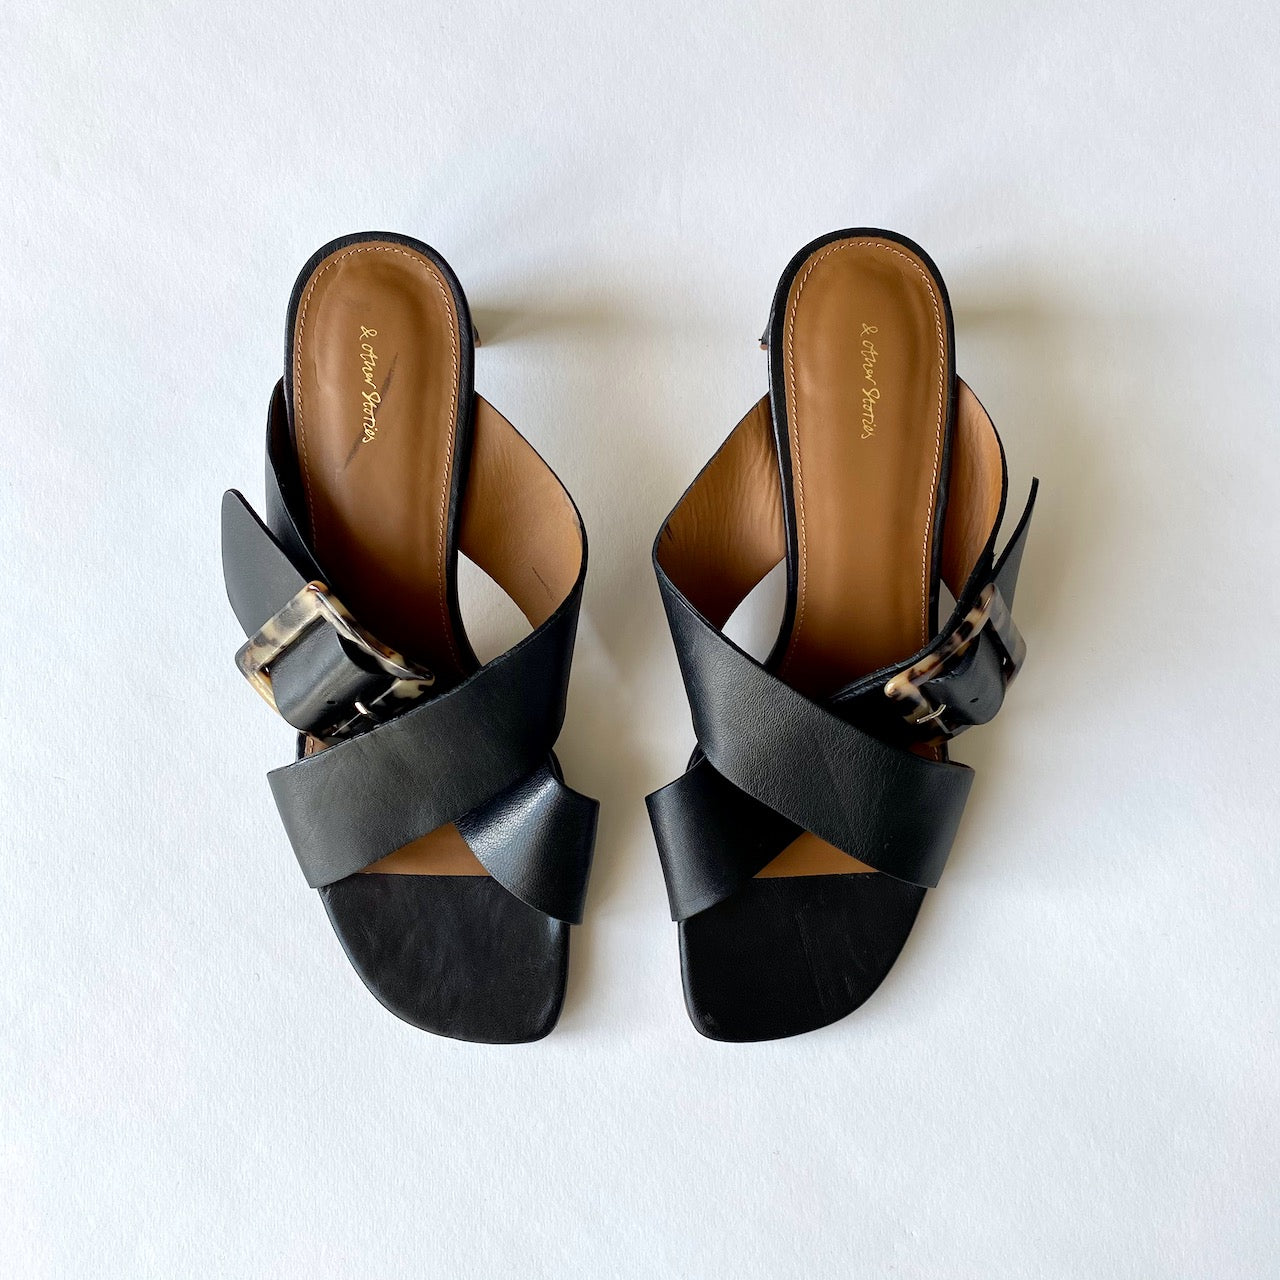 & Other Stories black leather cross-over mules